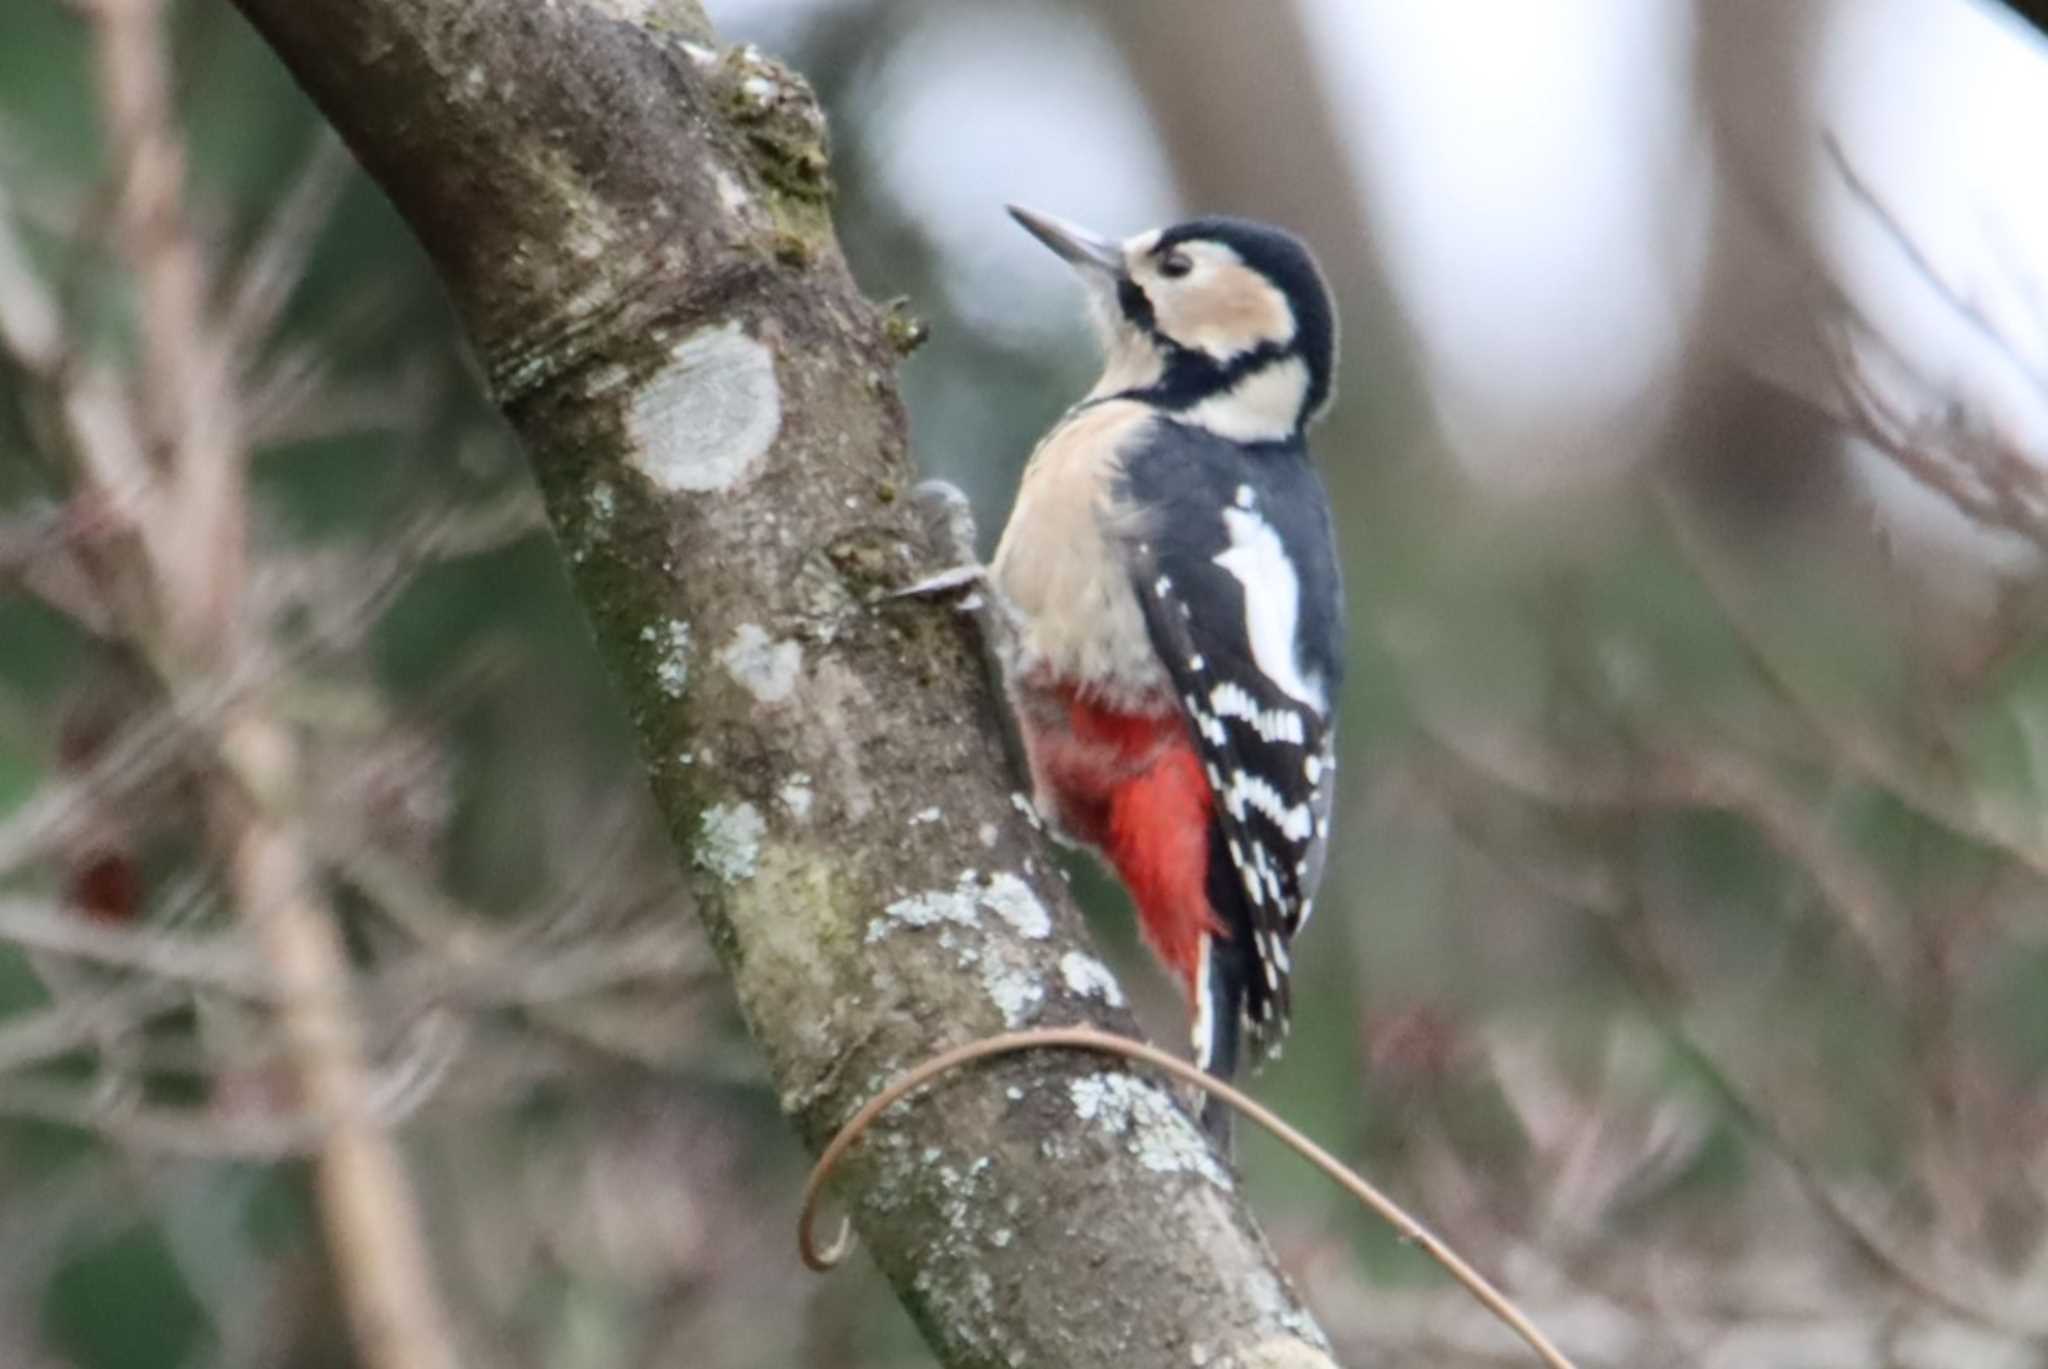 Photo of Great Spotted Woodpecker at Kodomo Shizen Park by ぼぼぼ